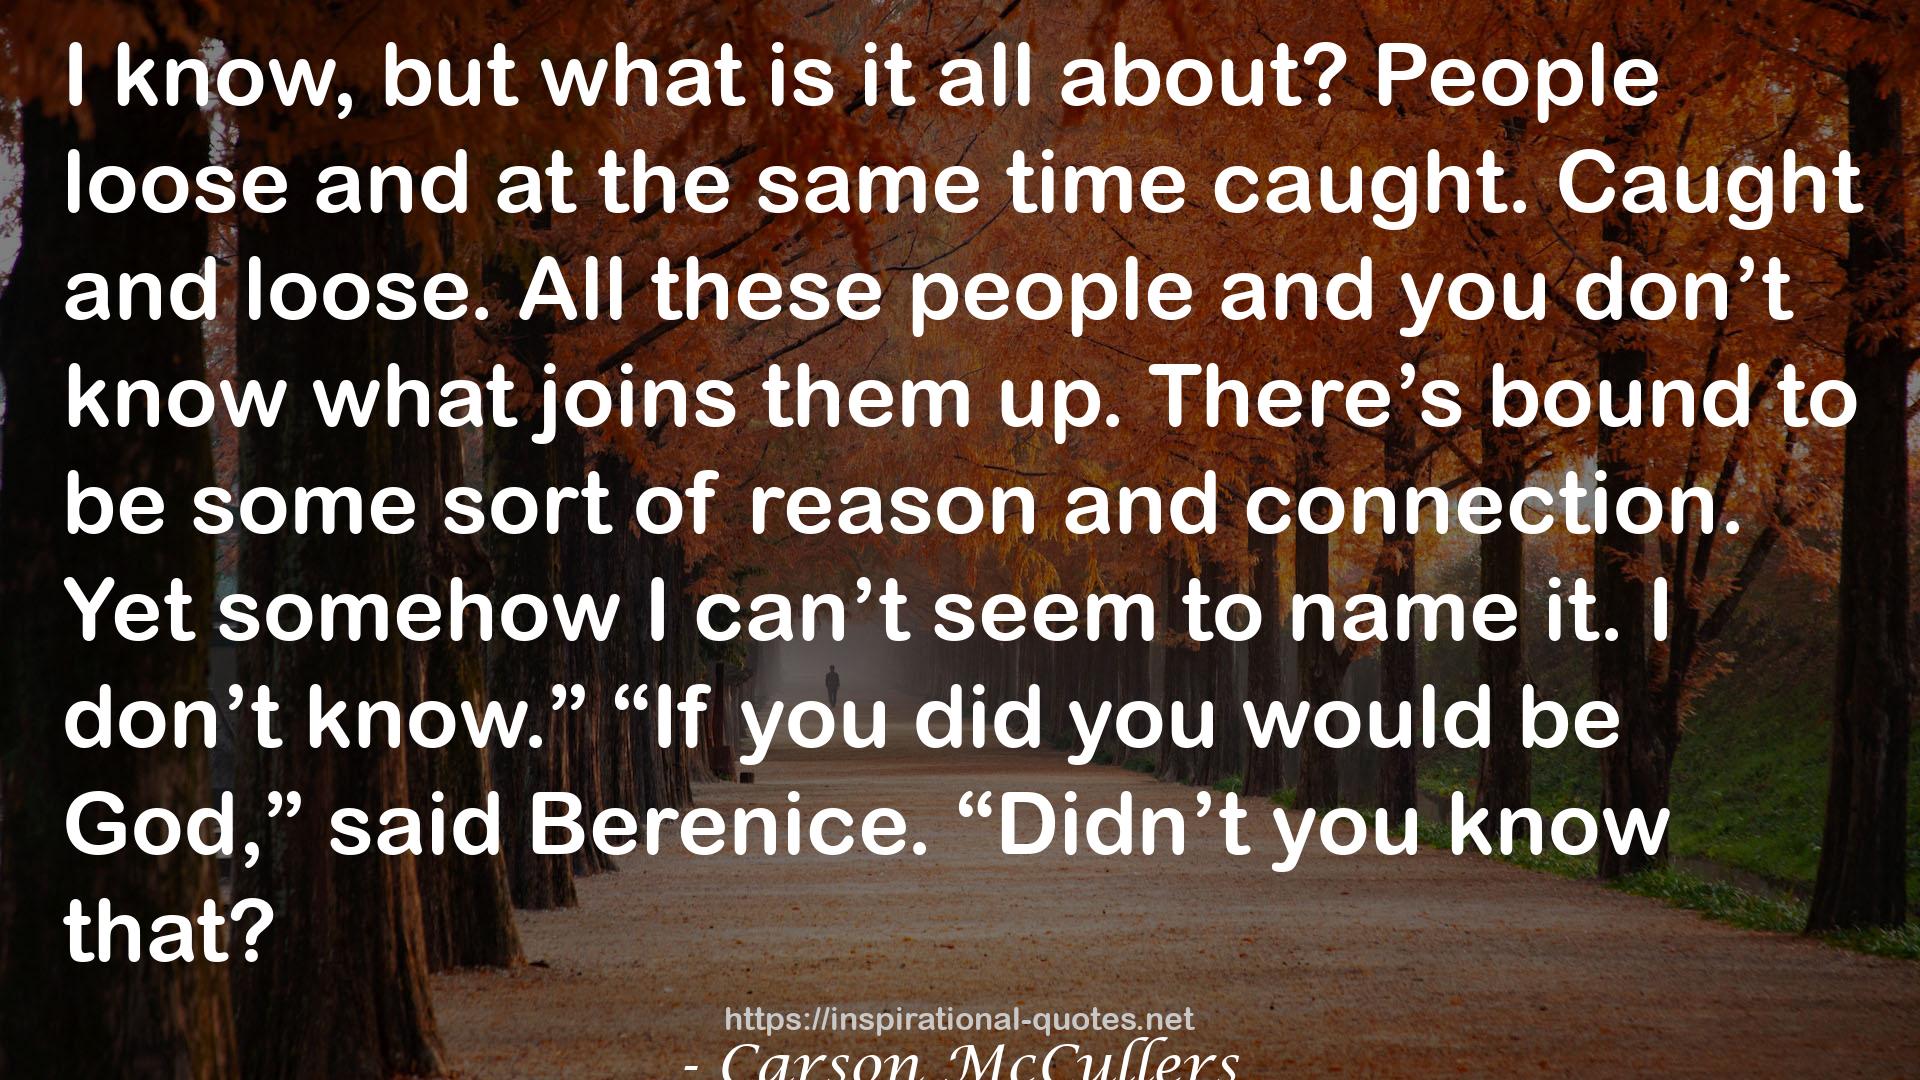 Carson McCullers QUOTES